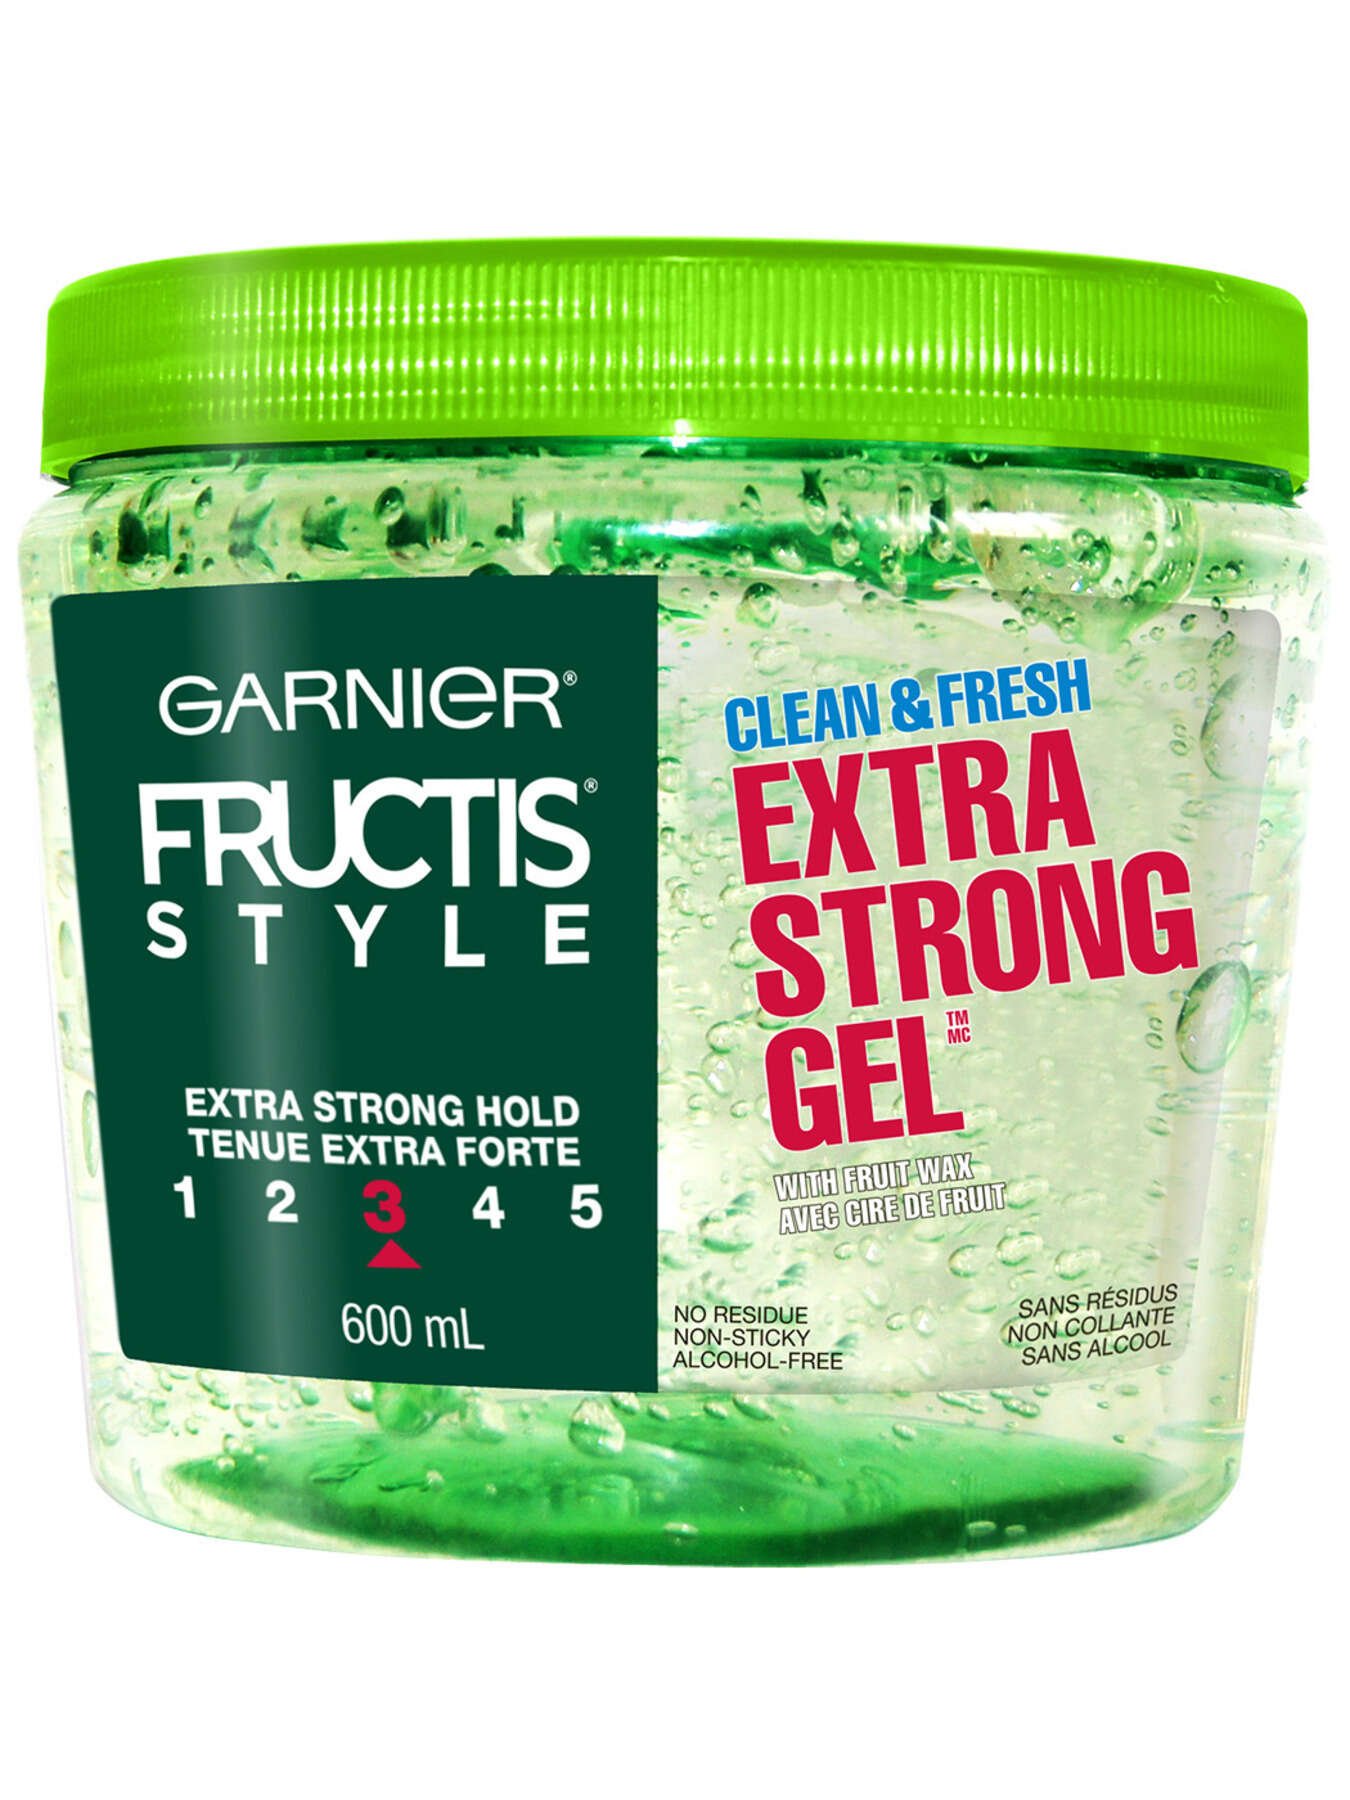 Classic Extra Strong Gel | Garnier Fructis Style